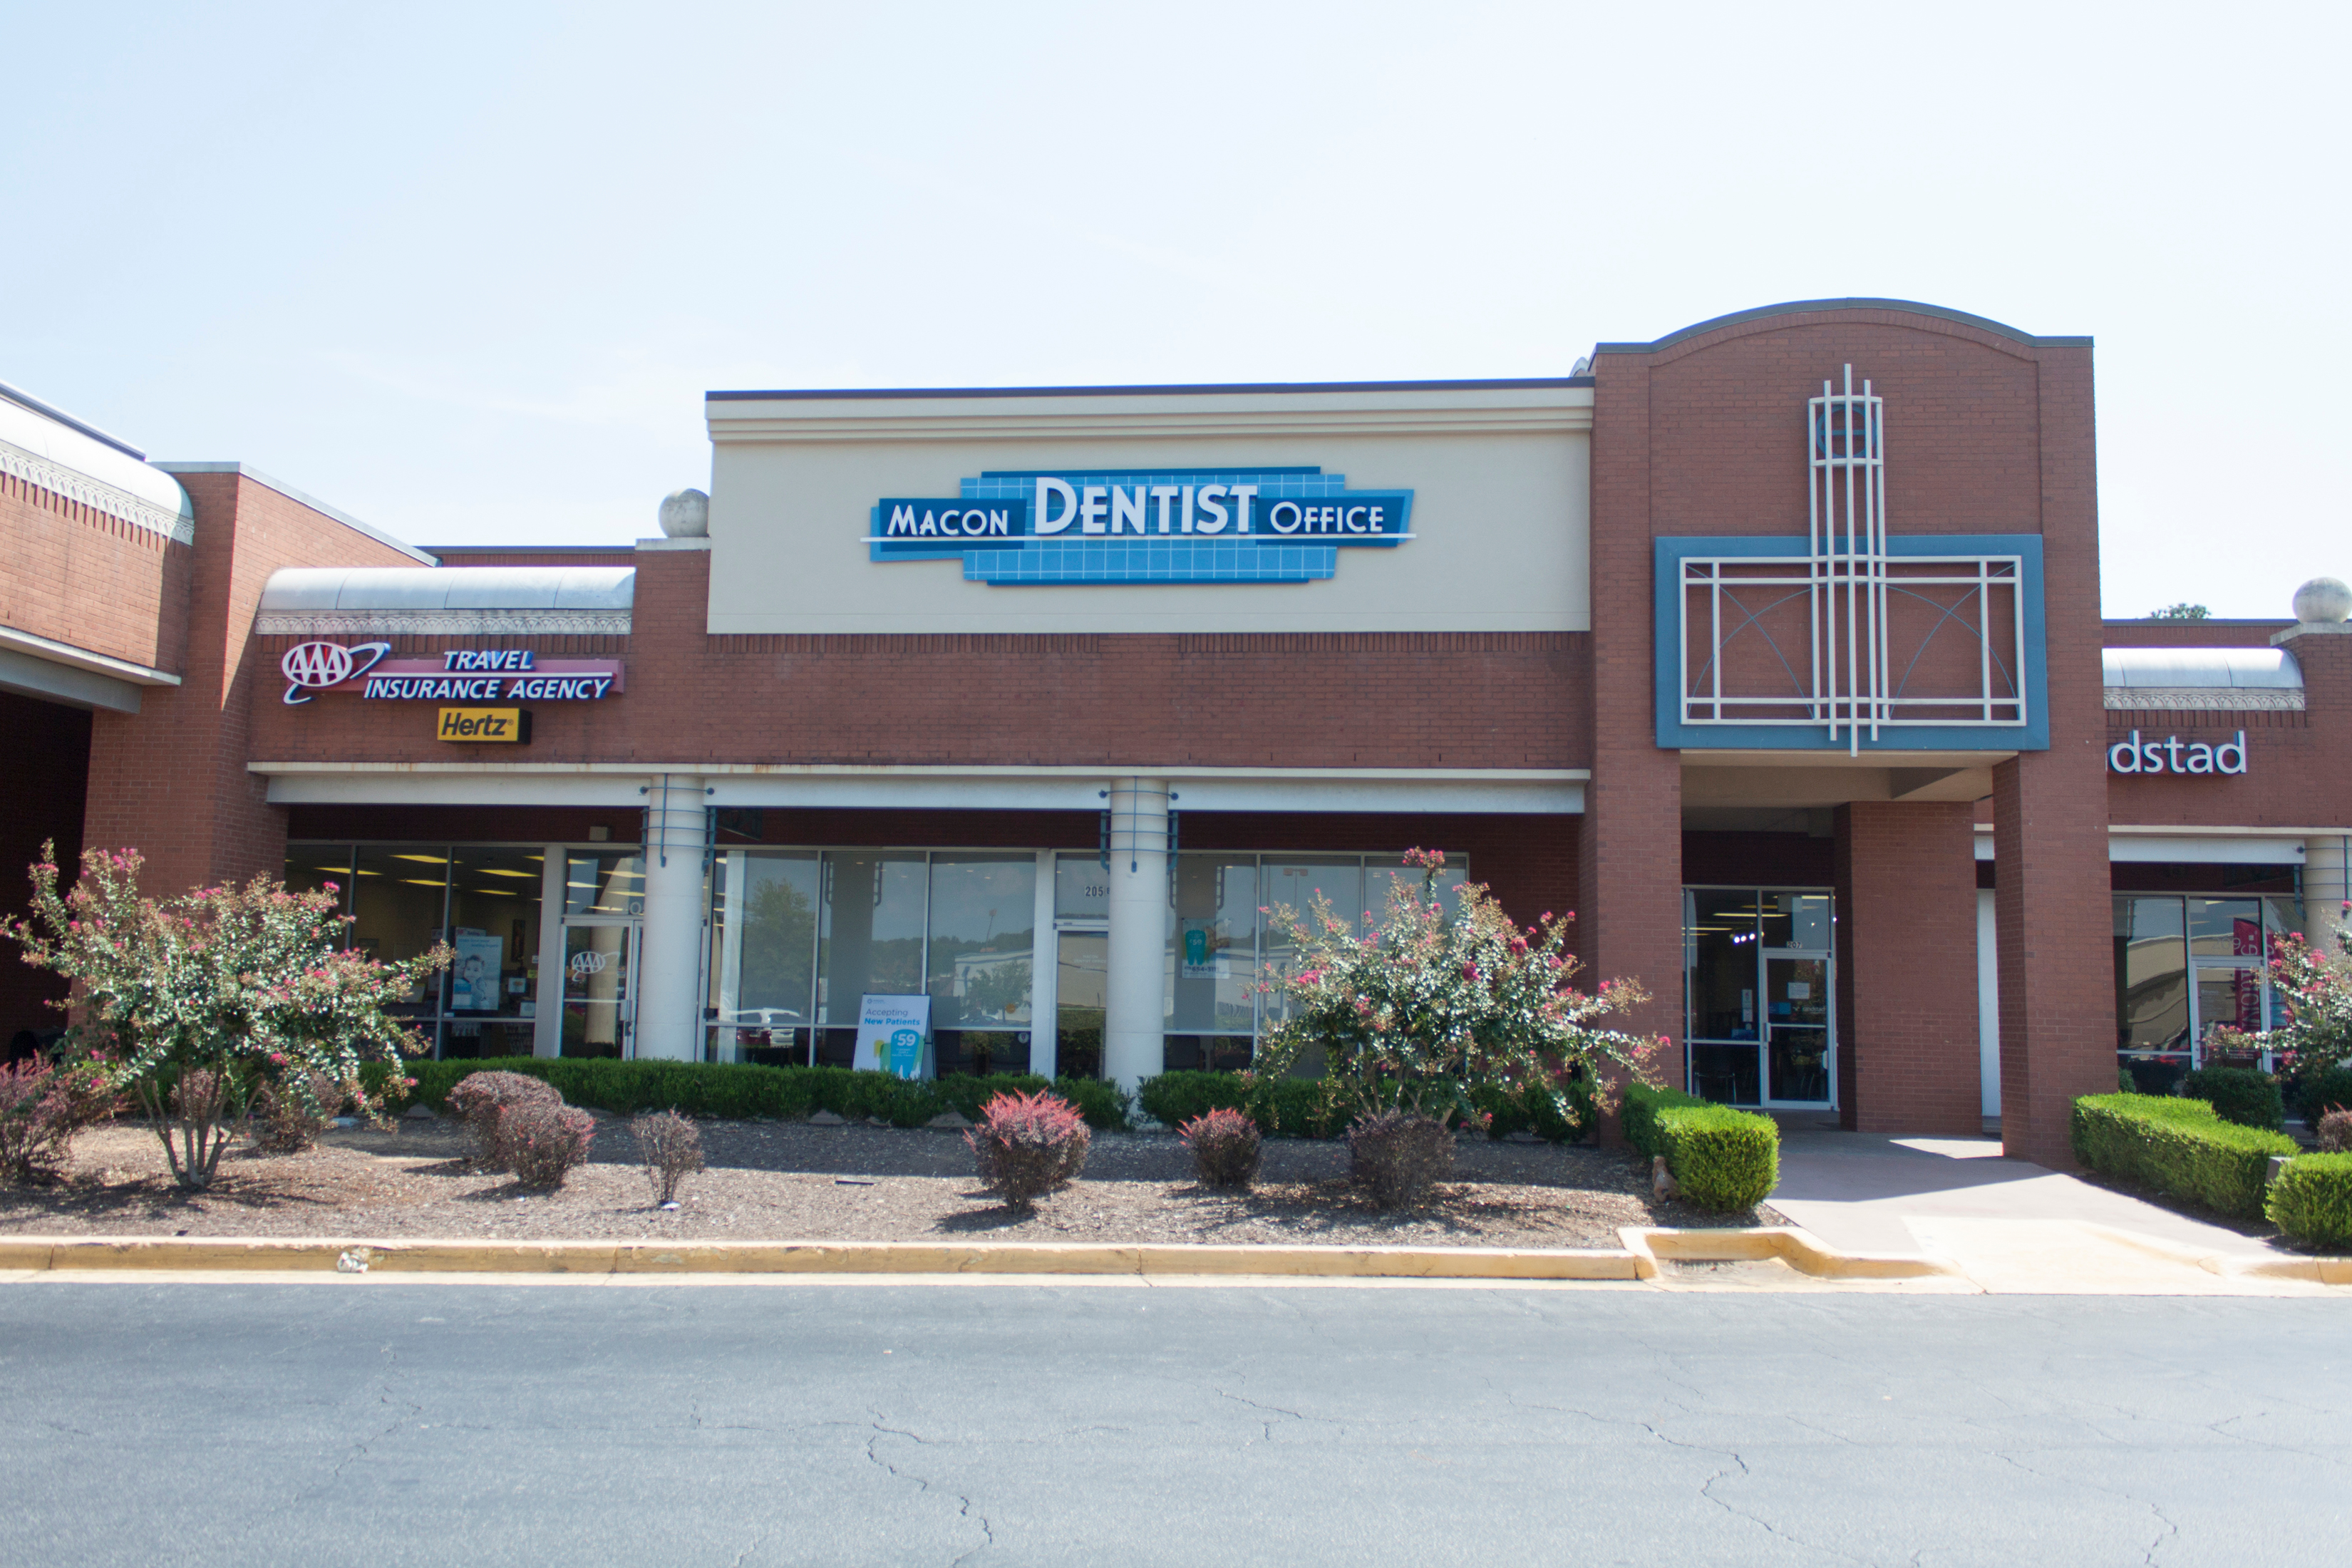 Macon Dentist Office Coupons near me in Macon, GA 31210 ...